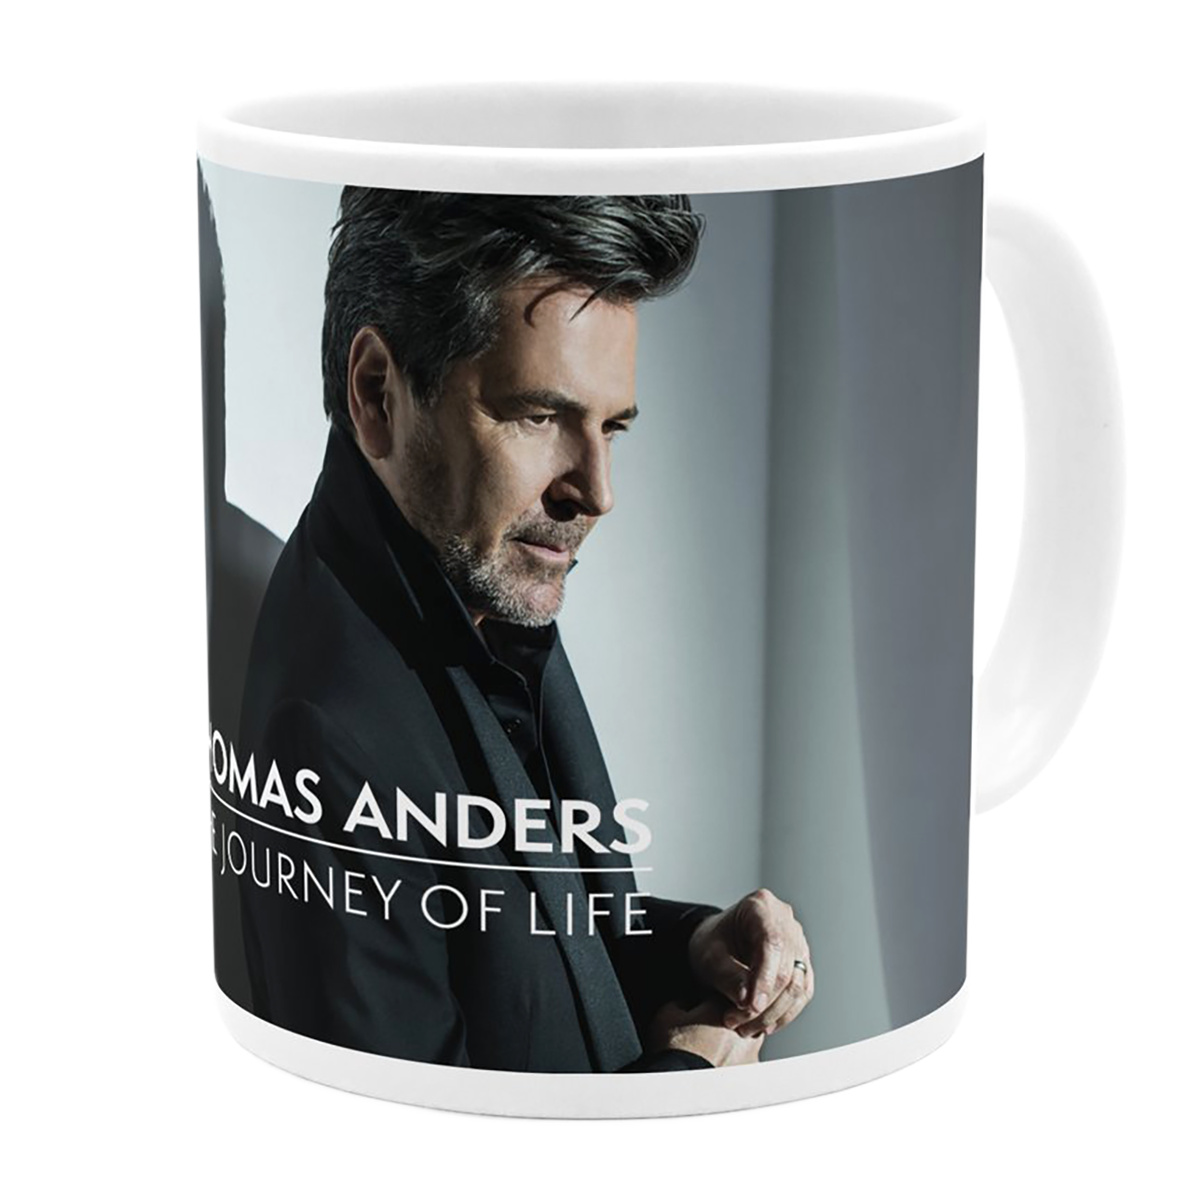 Thomas Anders Tasse 'The Journey of life'